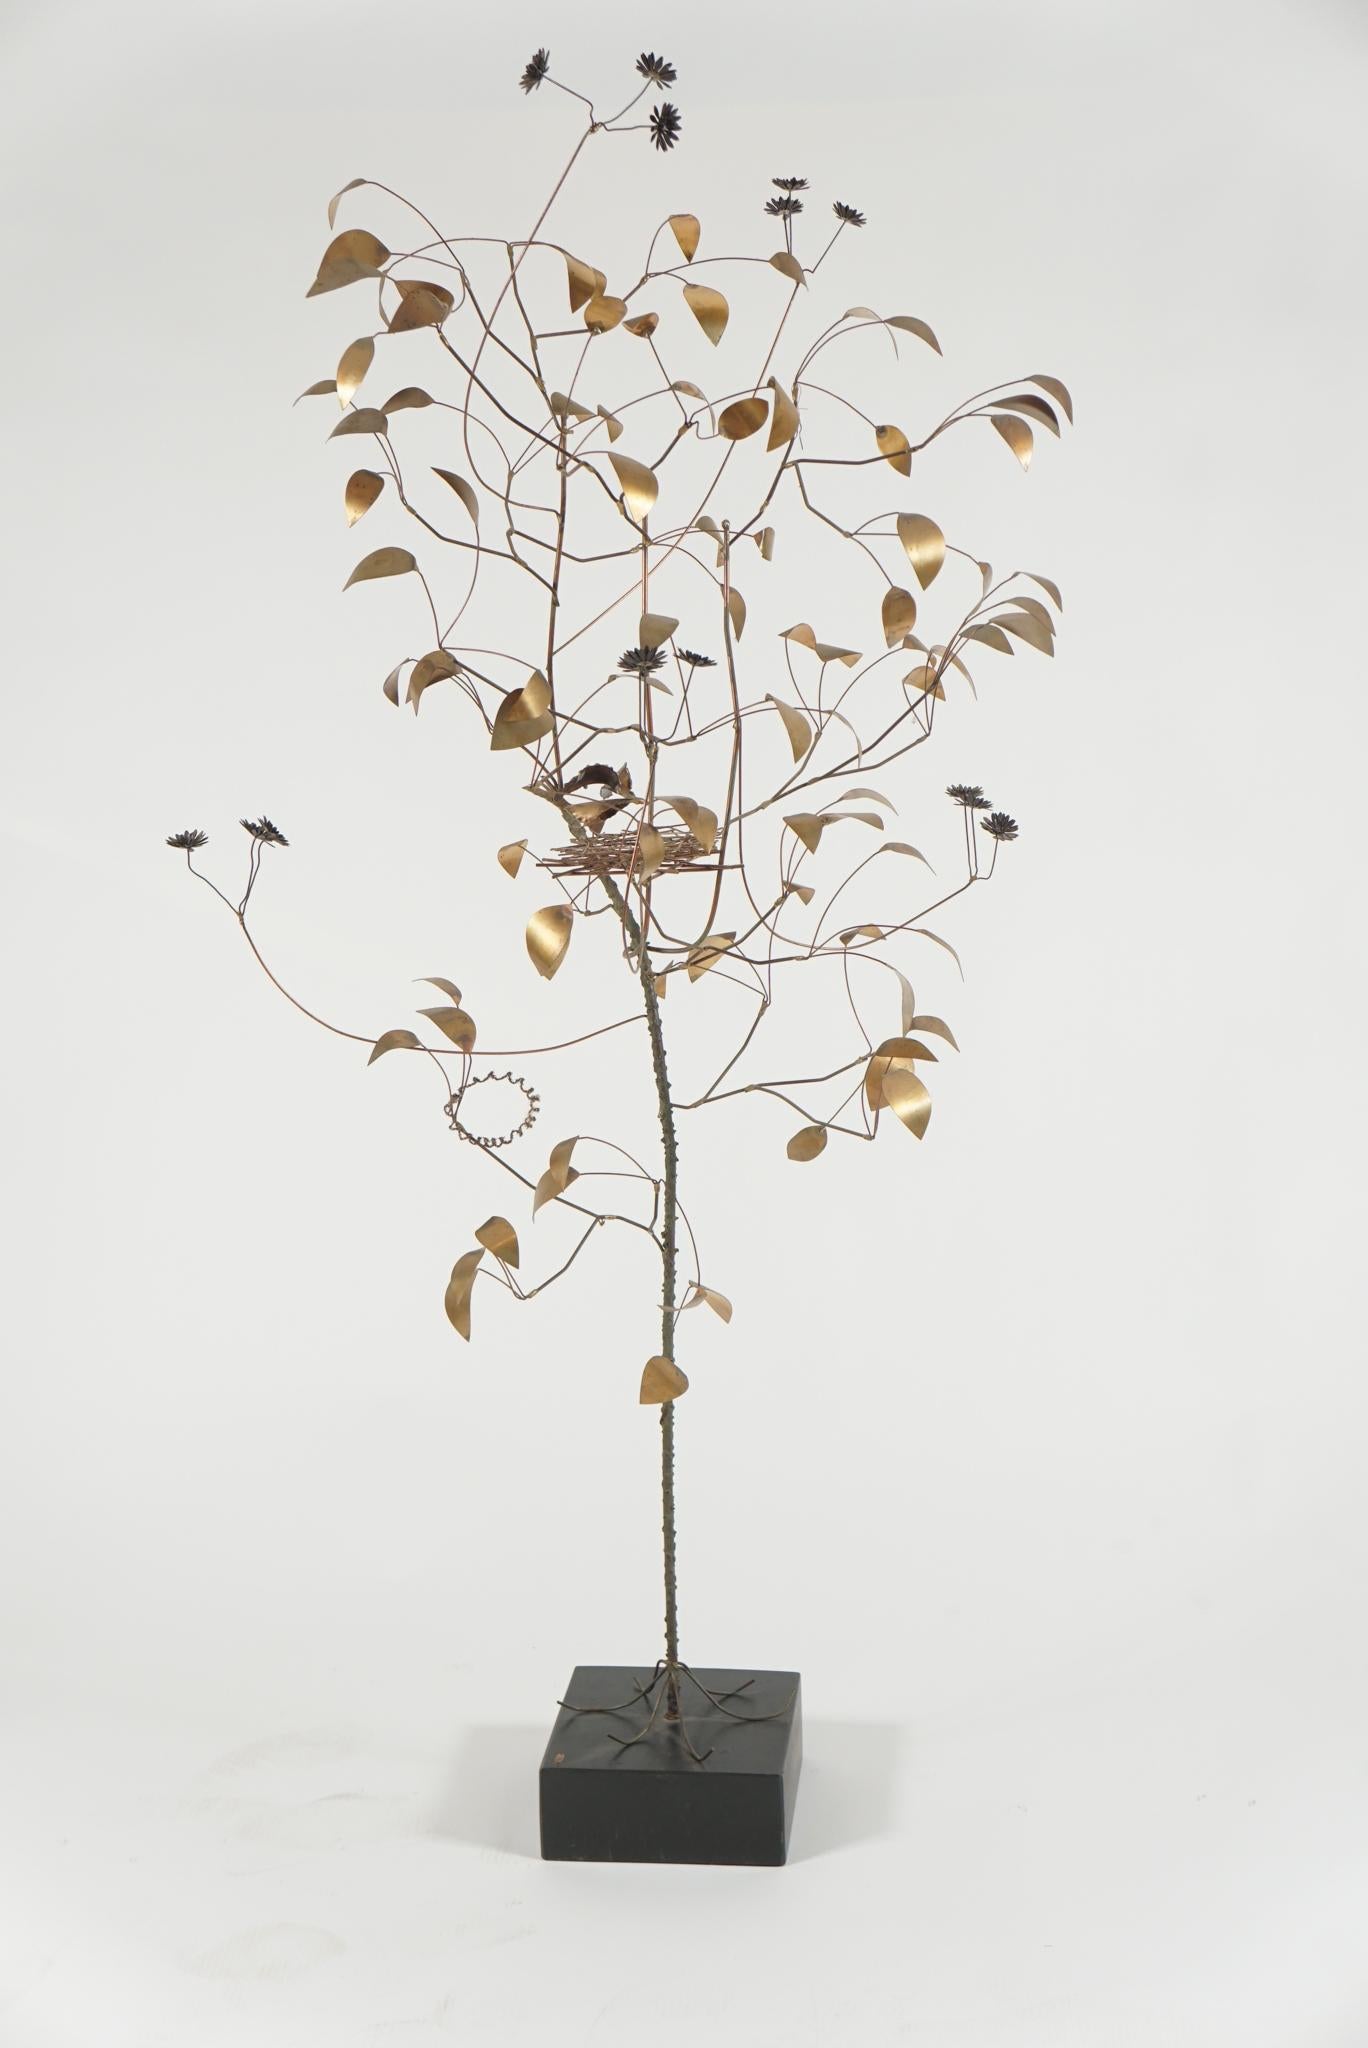 A stylish Mid-Century Modern sculpture by American sculptor Curtis Jere, in copper, a large tree with bird's nest and hovering mother bird, on a black lacquer stand, signed and dated 'Jere 69'.
 